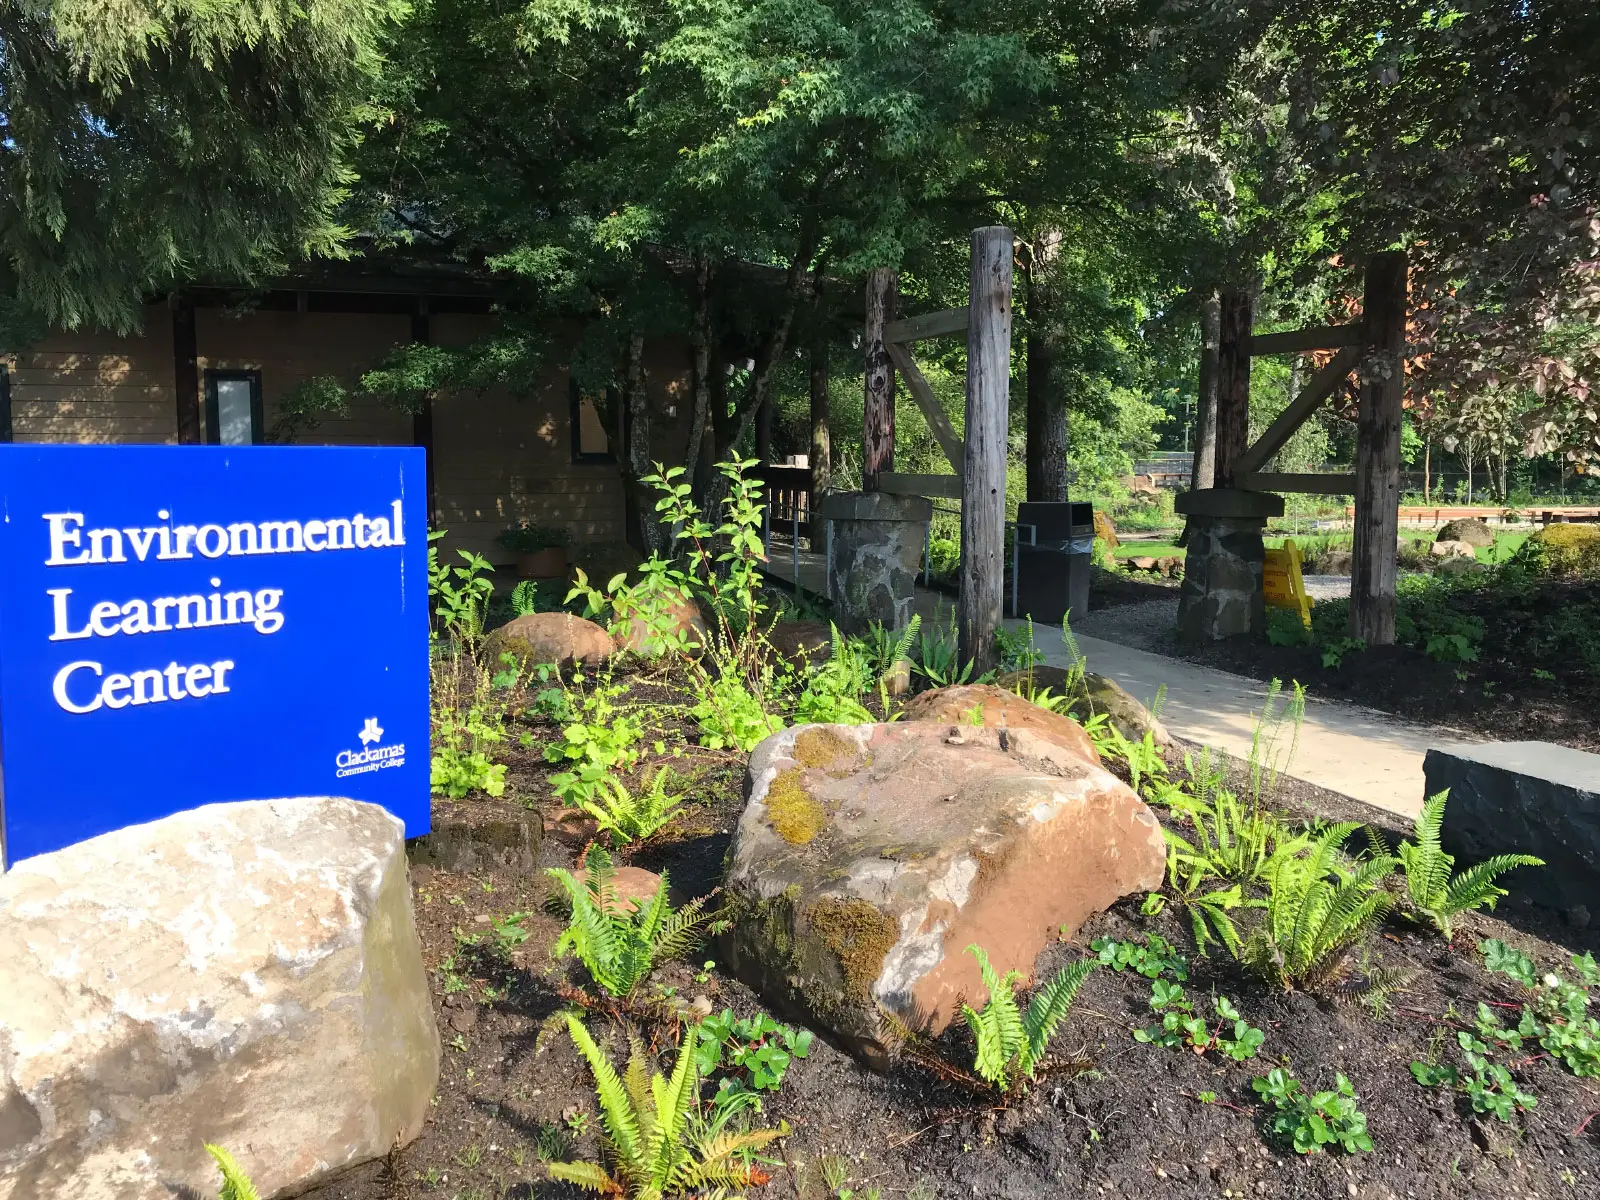 The Environmental Learning Center's blue entrance sign, surrounded by rocks and greenery, just outside Lakeside Hall, at the Oregon City campus